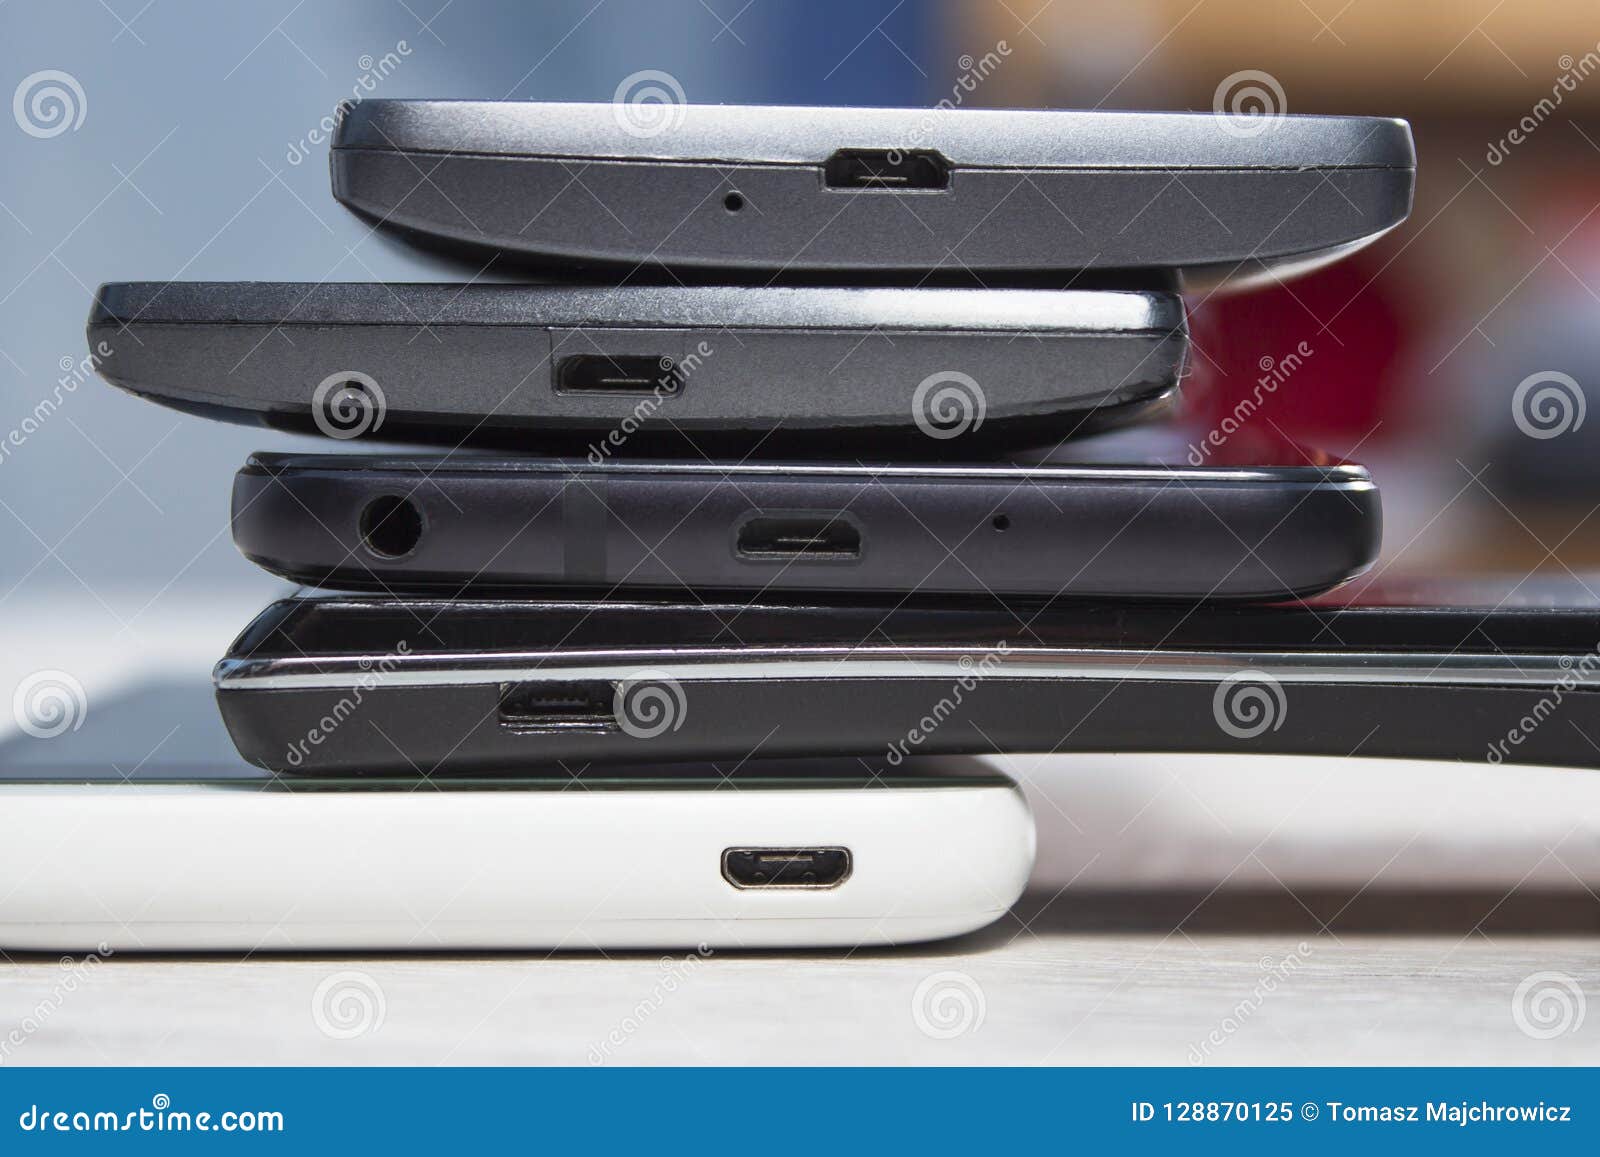 Mini Usb Ports in Mobile Phones Arranged One Top the Other. Stock Image - Image of compact, mobile: 128870125